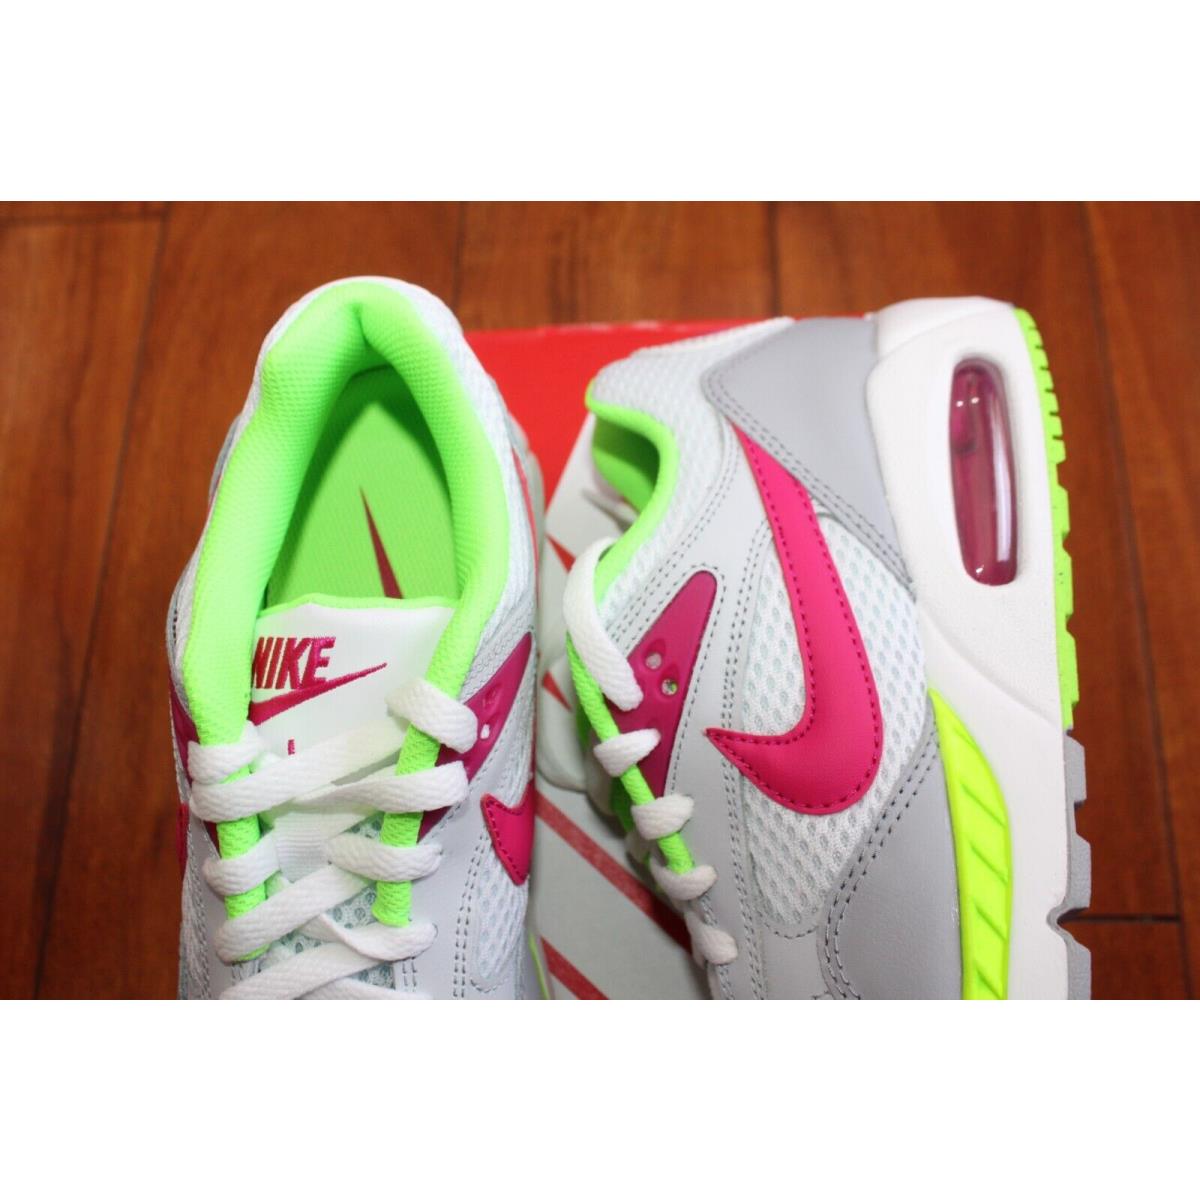 Nike shoes Air Max - Multi-Color 1